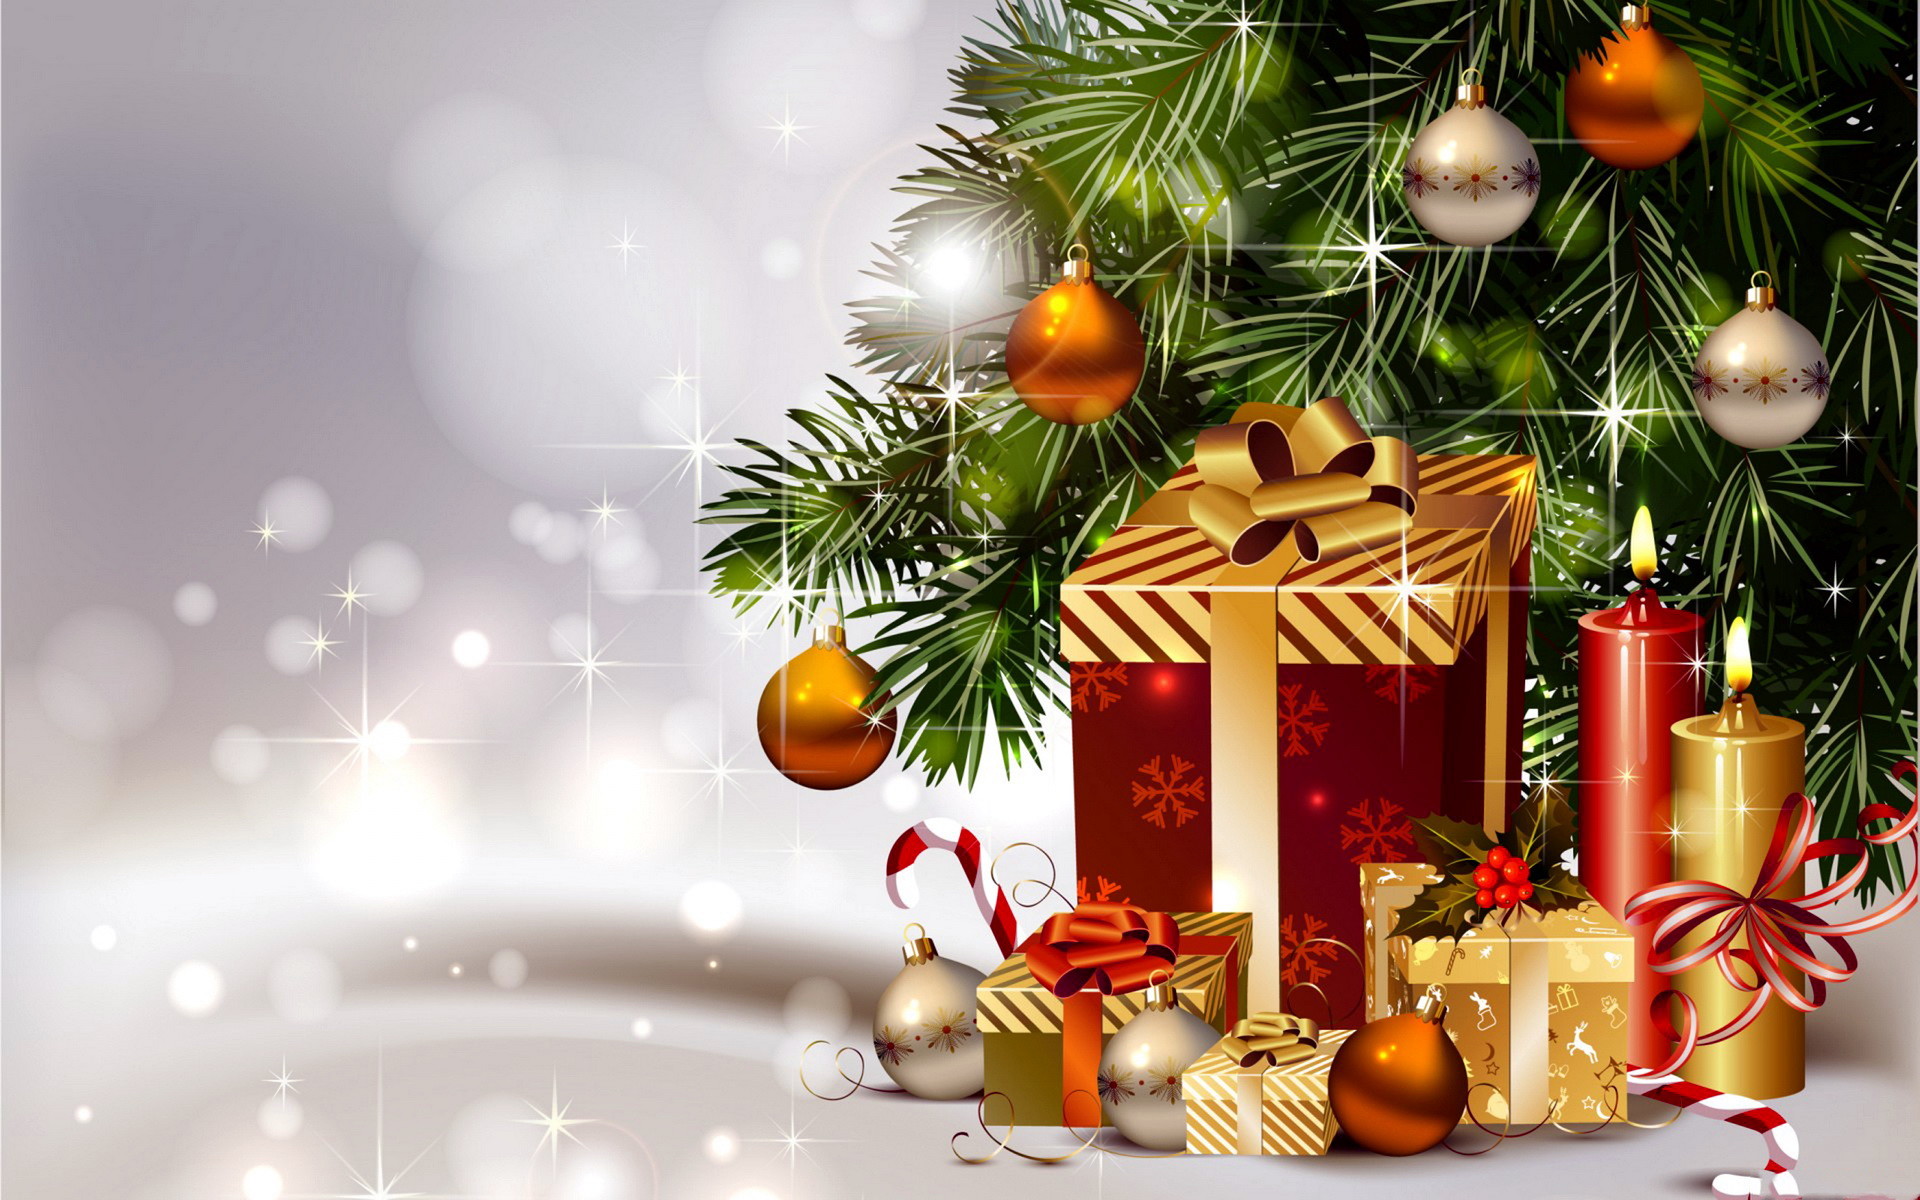 3D Christmas Wallpapers – Free download latest 3D Christmas Wallpapers for  Computer, Mobile, iPhone